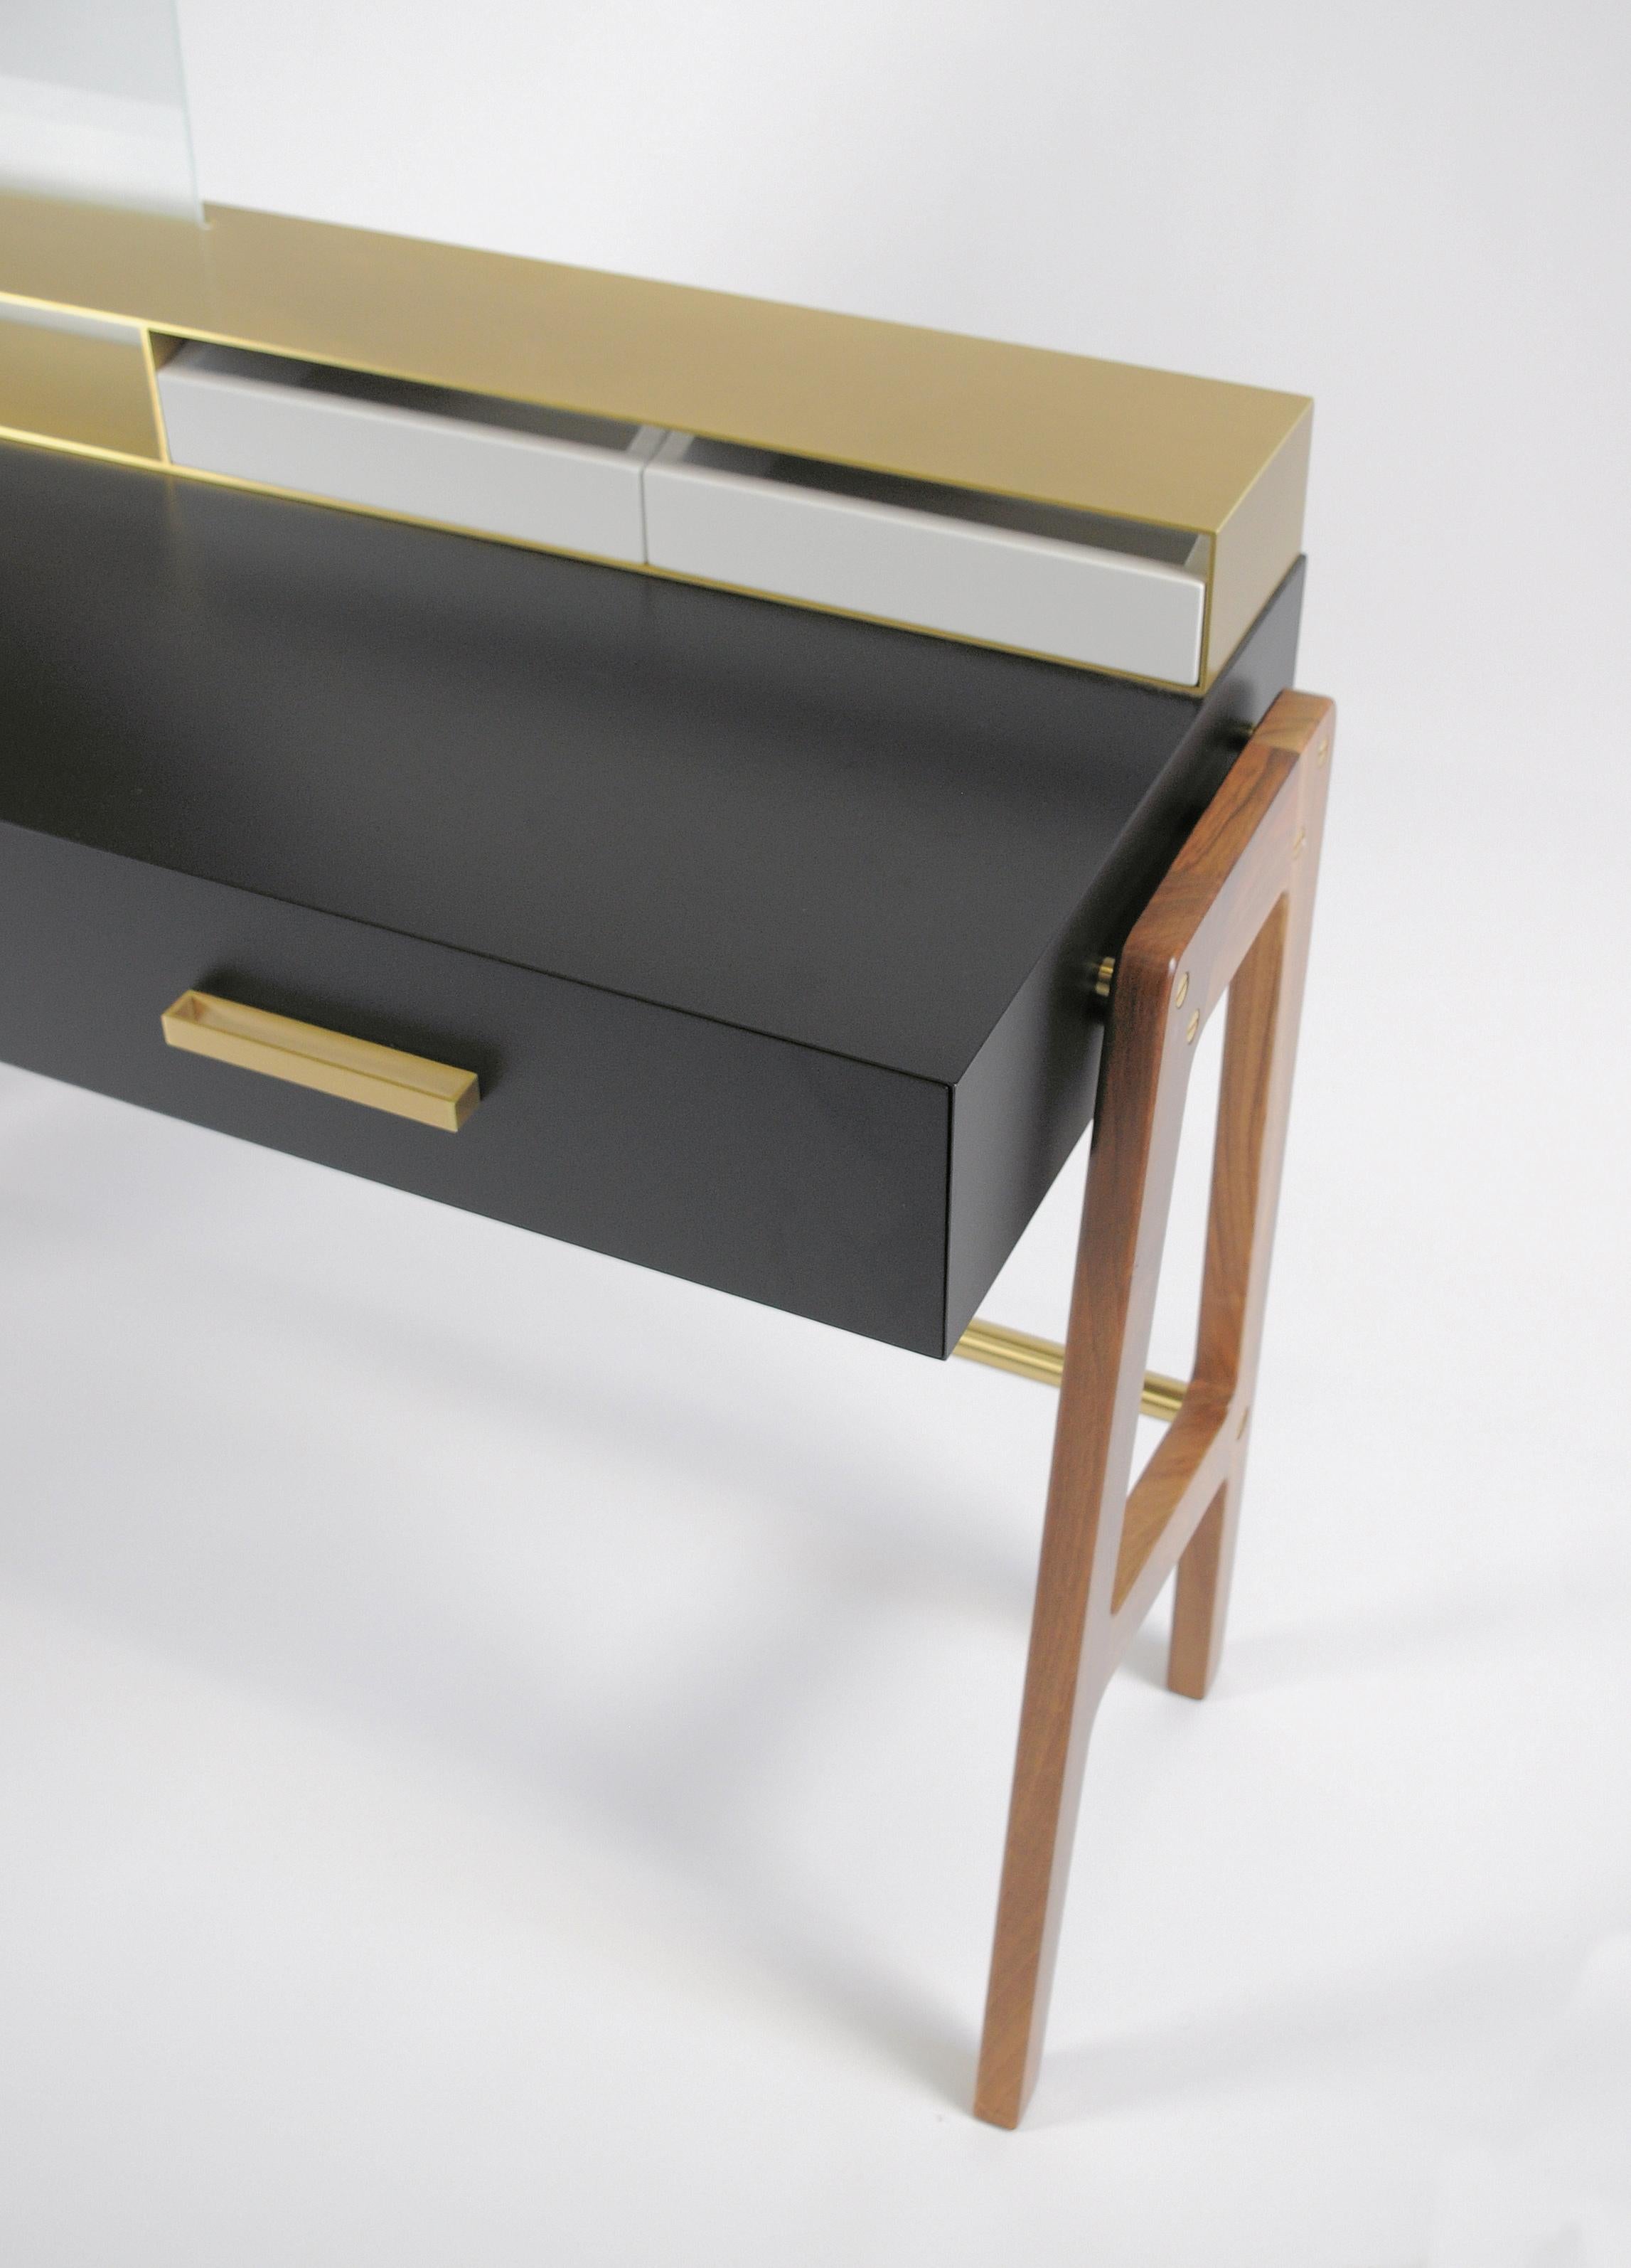 Modern Contemporary Beauty Desk, Makeup Table, Jewel Case, Mirror. Lacquered Oak, Brass For Sale